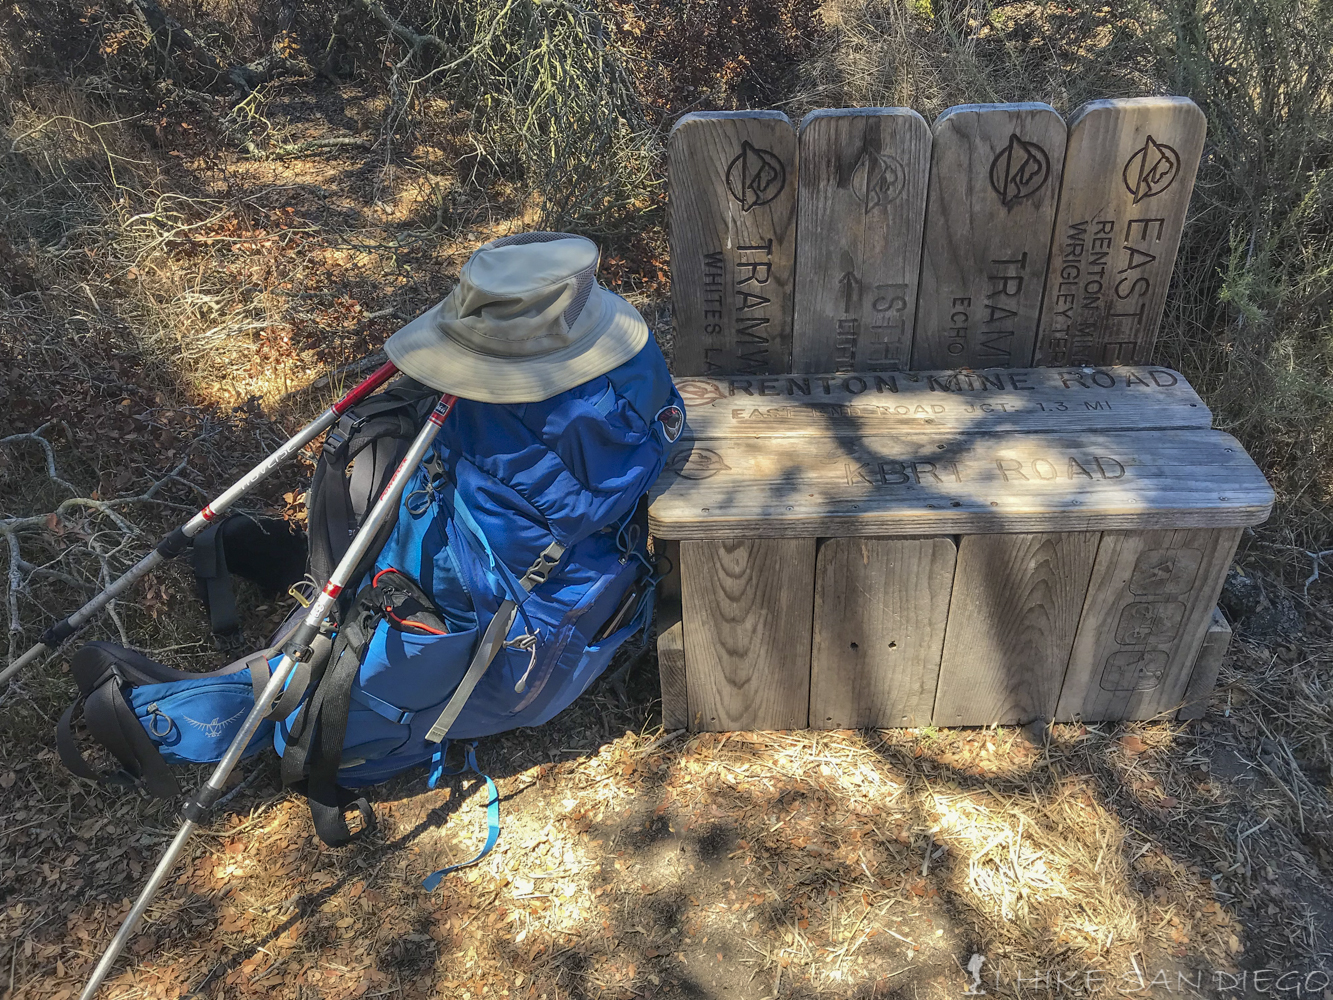 Nice little bench in the shade to rest on before making your way up the hill for the last 2 miles into Black Jack Campgrounds. 